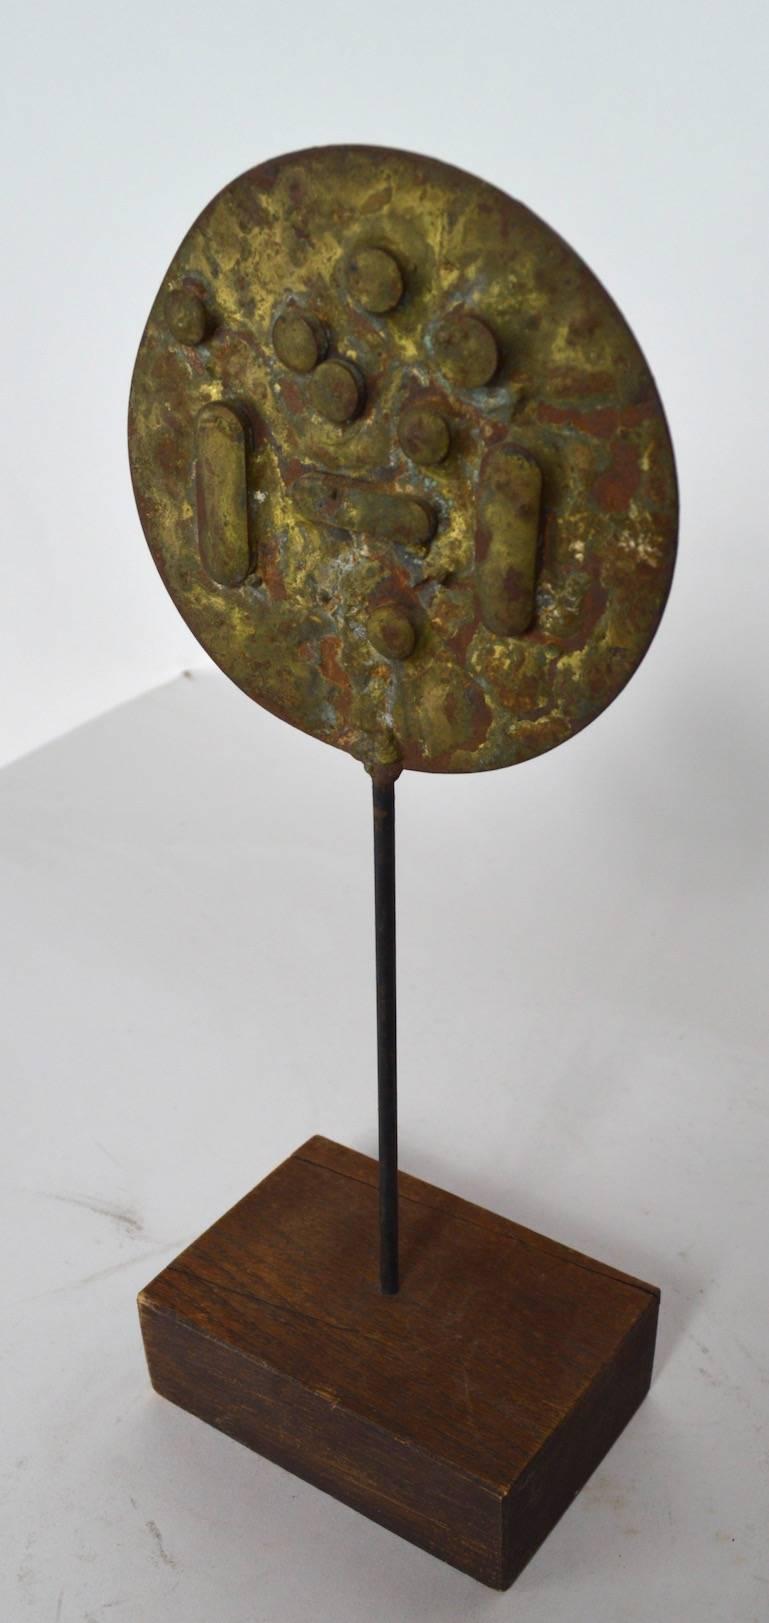 Bronze, brass and wood cabinet scale Brutalist sculpture by noted sculptor Dimitri Hadzi. Intriguing abstract mixed metal example signed on the base, as shown.
          